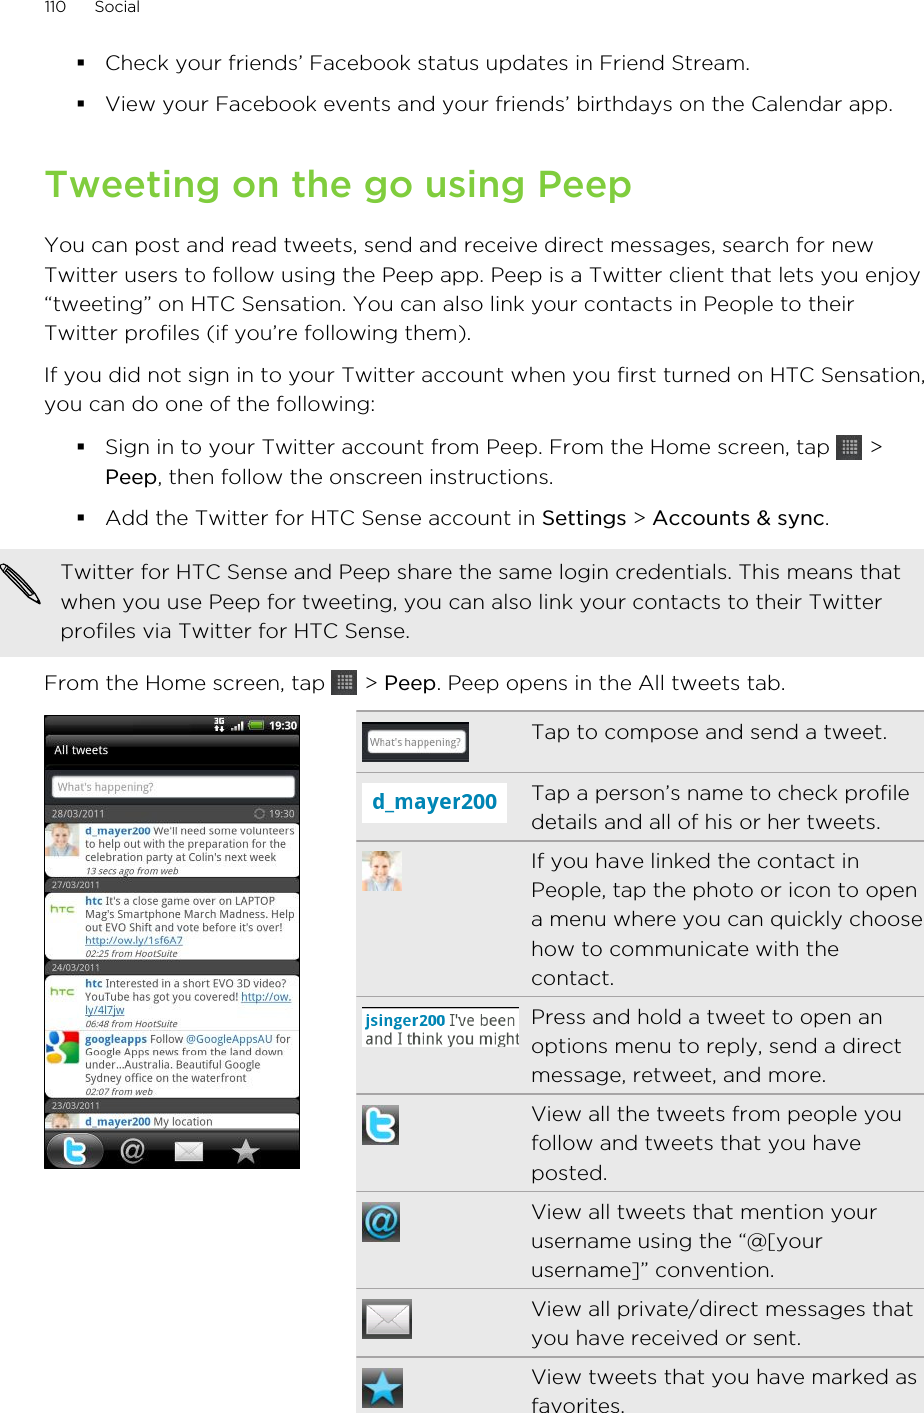 §Check your friends’ Facebook status updates in Friend Stream.§View your Facebook events and your friends’ birthdays on the Calendar app.Tweeting on the go using PeepYou can post and read tweets, send and receive direct messages, search for newTwitter users to follow using the Peep app. Peep is a Twitter client that lets you enjoy“tweeting” on HTC Sensation. You can also link your contacts in People to theirTwitter profiles (if you’re following them).If you did not sign in to your Twitter account when you first turned on HTC Sensation,you can do one of the following:§Sign in to your Twitter account from Peep. From the Home screen, tap   &gt;Peep, then follow the onscreen instructions.§Add the Twitter for HTC Sense account in Settings &gt; Accounts &amp; sync.Twitter for HTC Sense and Peep share the same login credentials. This means thatwhen you use Peep for tweeting, you can also link your contacts to their Twitterprofiles via Twitter for HTC Sense.From the Home screen, tap   &gt; Peep. Peep opens in the All tweets tab.Tap to compose and send a tweet.Tap a person’s name to check profiledetails and all of his or her tweets.If you have linked the contact inPeople, tap the photo or icon to opena menu where you can quickly choosehow to communicate with thecontact.Press and hold a tweet to open anoptions menu to reply, send a directmessage, retweet, and more.View all the tweets from people youfollow and tweets that you haveposted.View all tweets that mention yourusername using the “@[yourusername]” convention.View all private/direct messages thatyou have received or sent.View tweets that you have marked asfavorites.110 Social